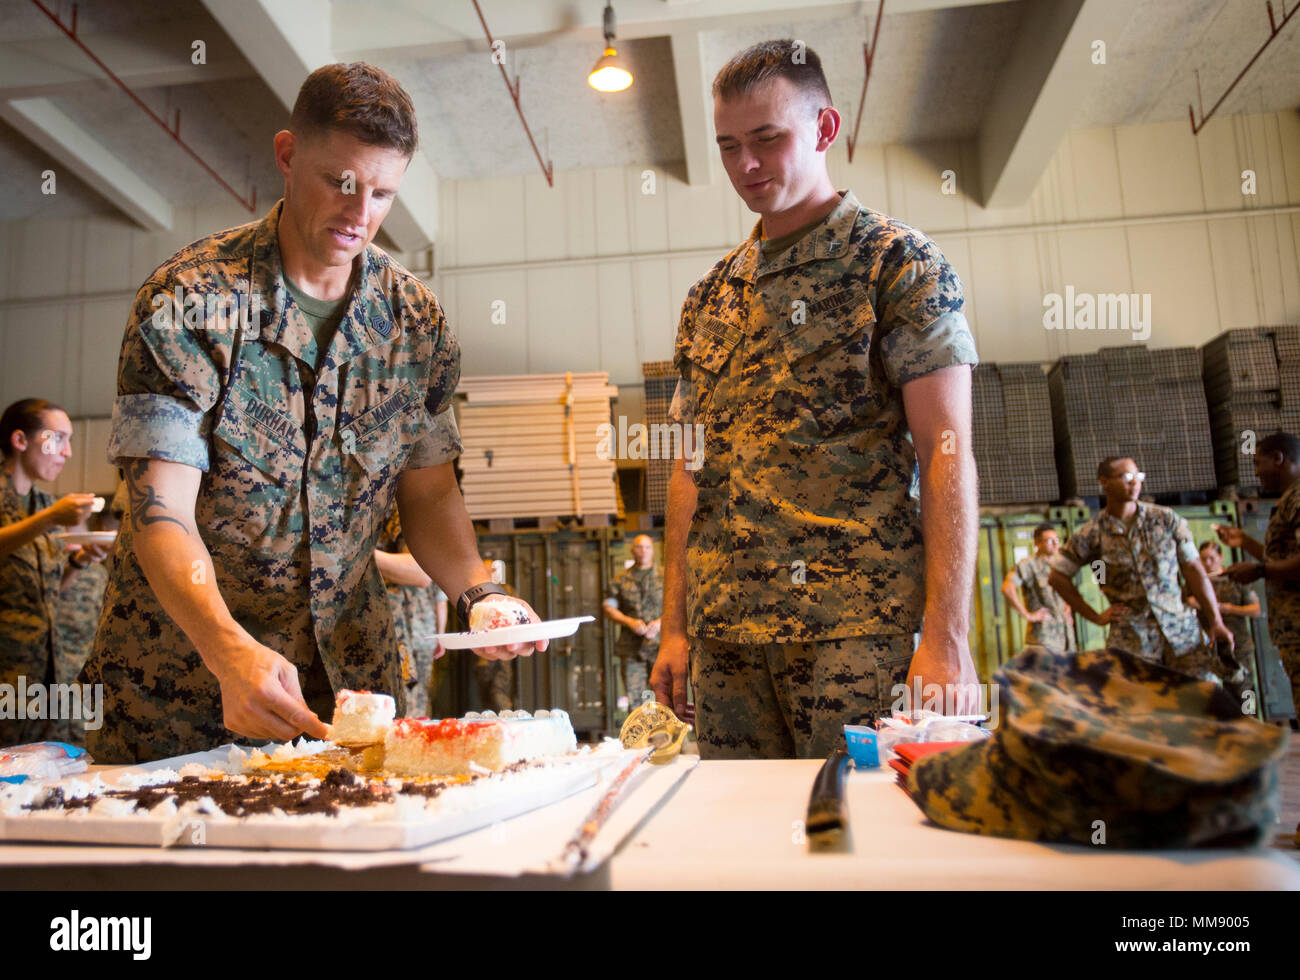 Sgt. Maj. Jeffrey D. Durham, Marine Tactical Air Command Squadron 18 sergeant major, passes out slices of cake during the 50th anniversary celebration of MTACS-18 at Marine Corps Air Station Futenma, September 15, 2017. During the ceremony, Marines read excerpts about the courageous efforts put forth by MTACS-18. The squadron was activated on September 1, 1967 at Da Nang, Republic of Vietnam, as Headquarters and Headquarters Squadron 18, Marine Air Control Group 18, 1st Marine Aircraft Wing. (U.S. Marine Corps photo by Lance Cpl. Andy Martinez) Stock Photo